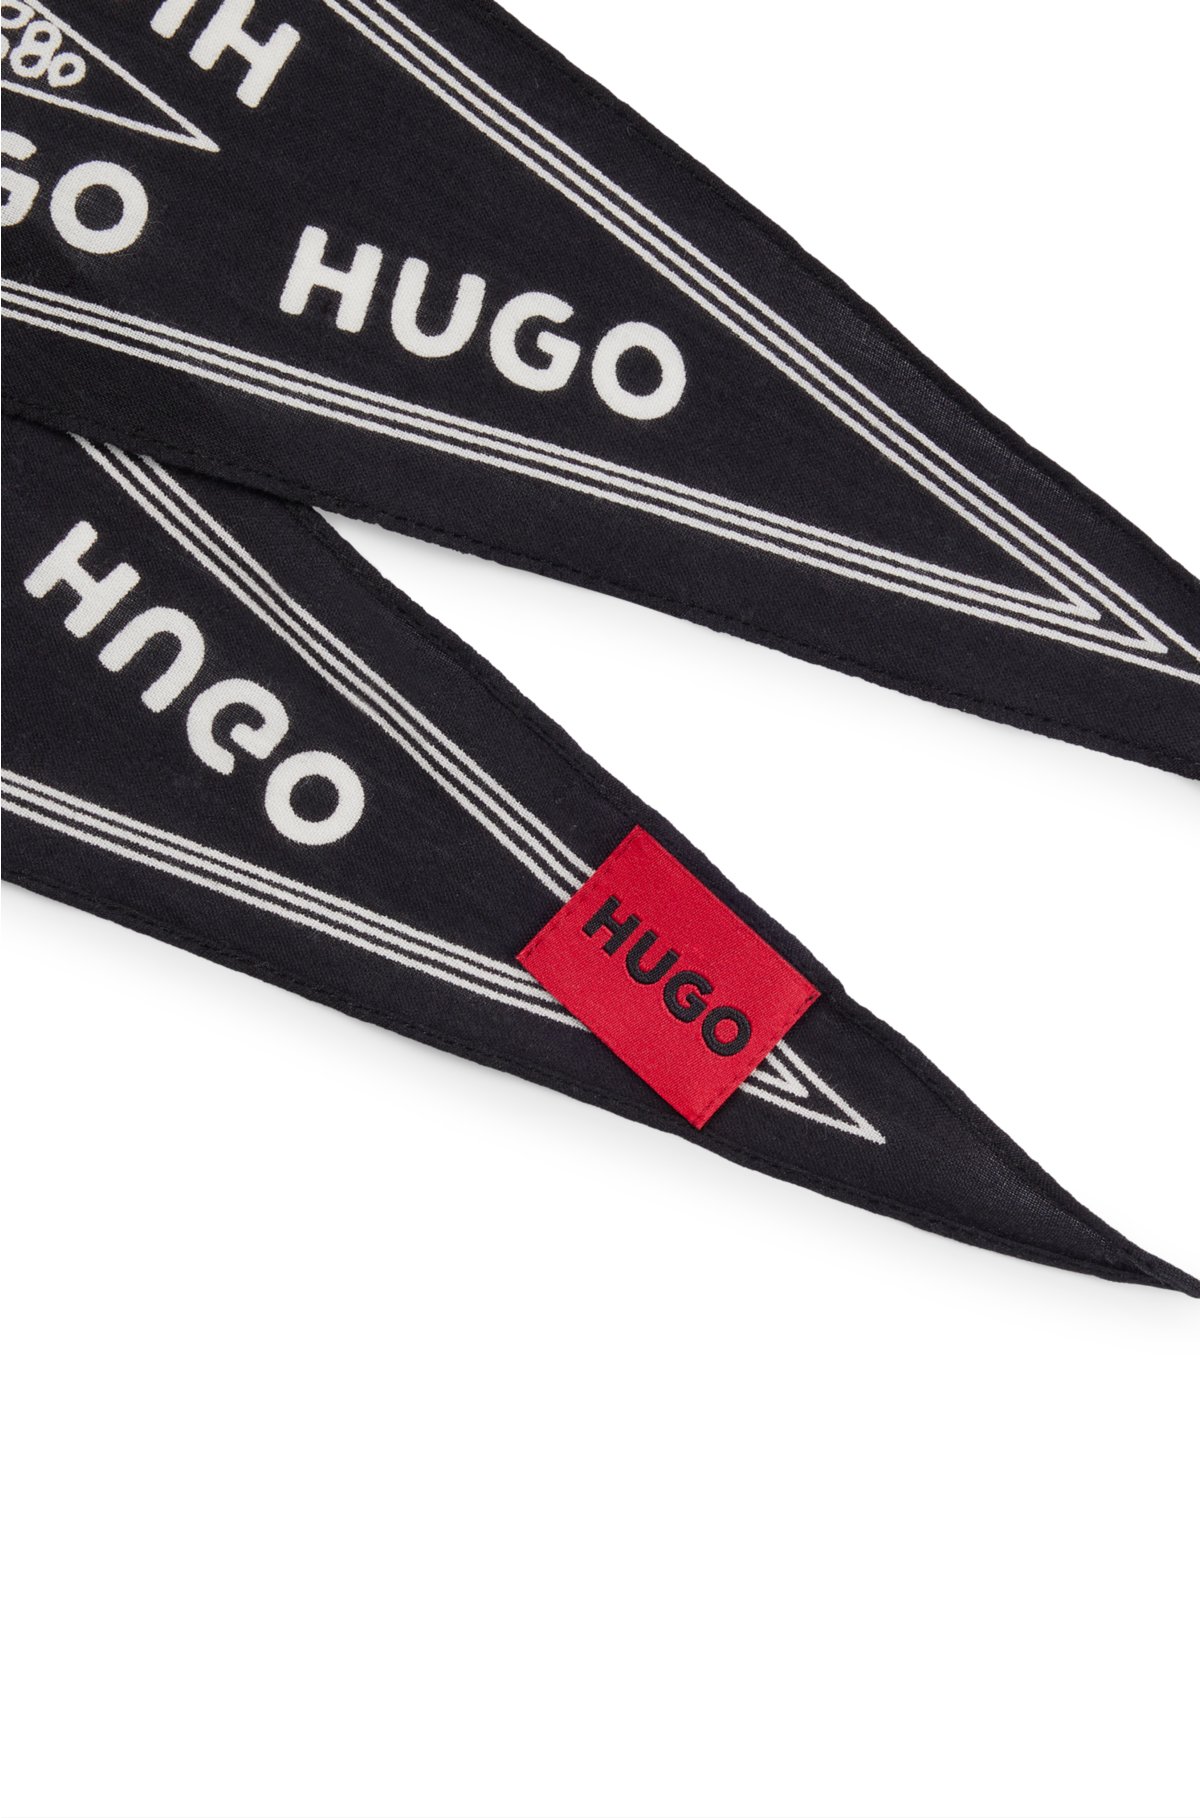 Bandana in pure cotton with logos and seasonal print, Black Patterned